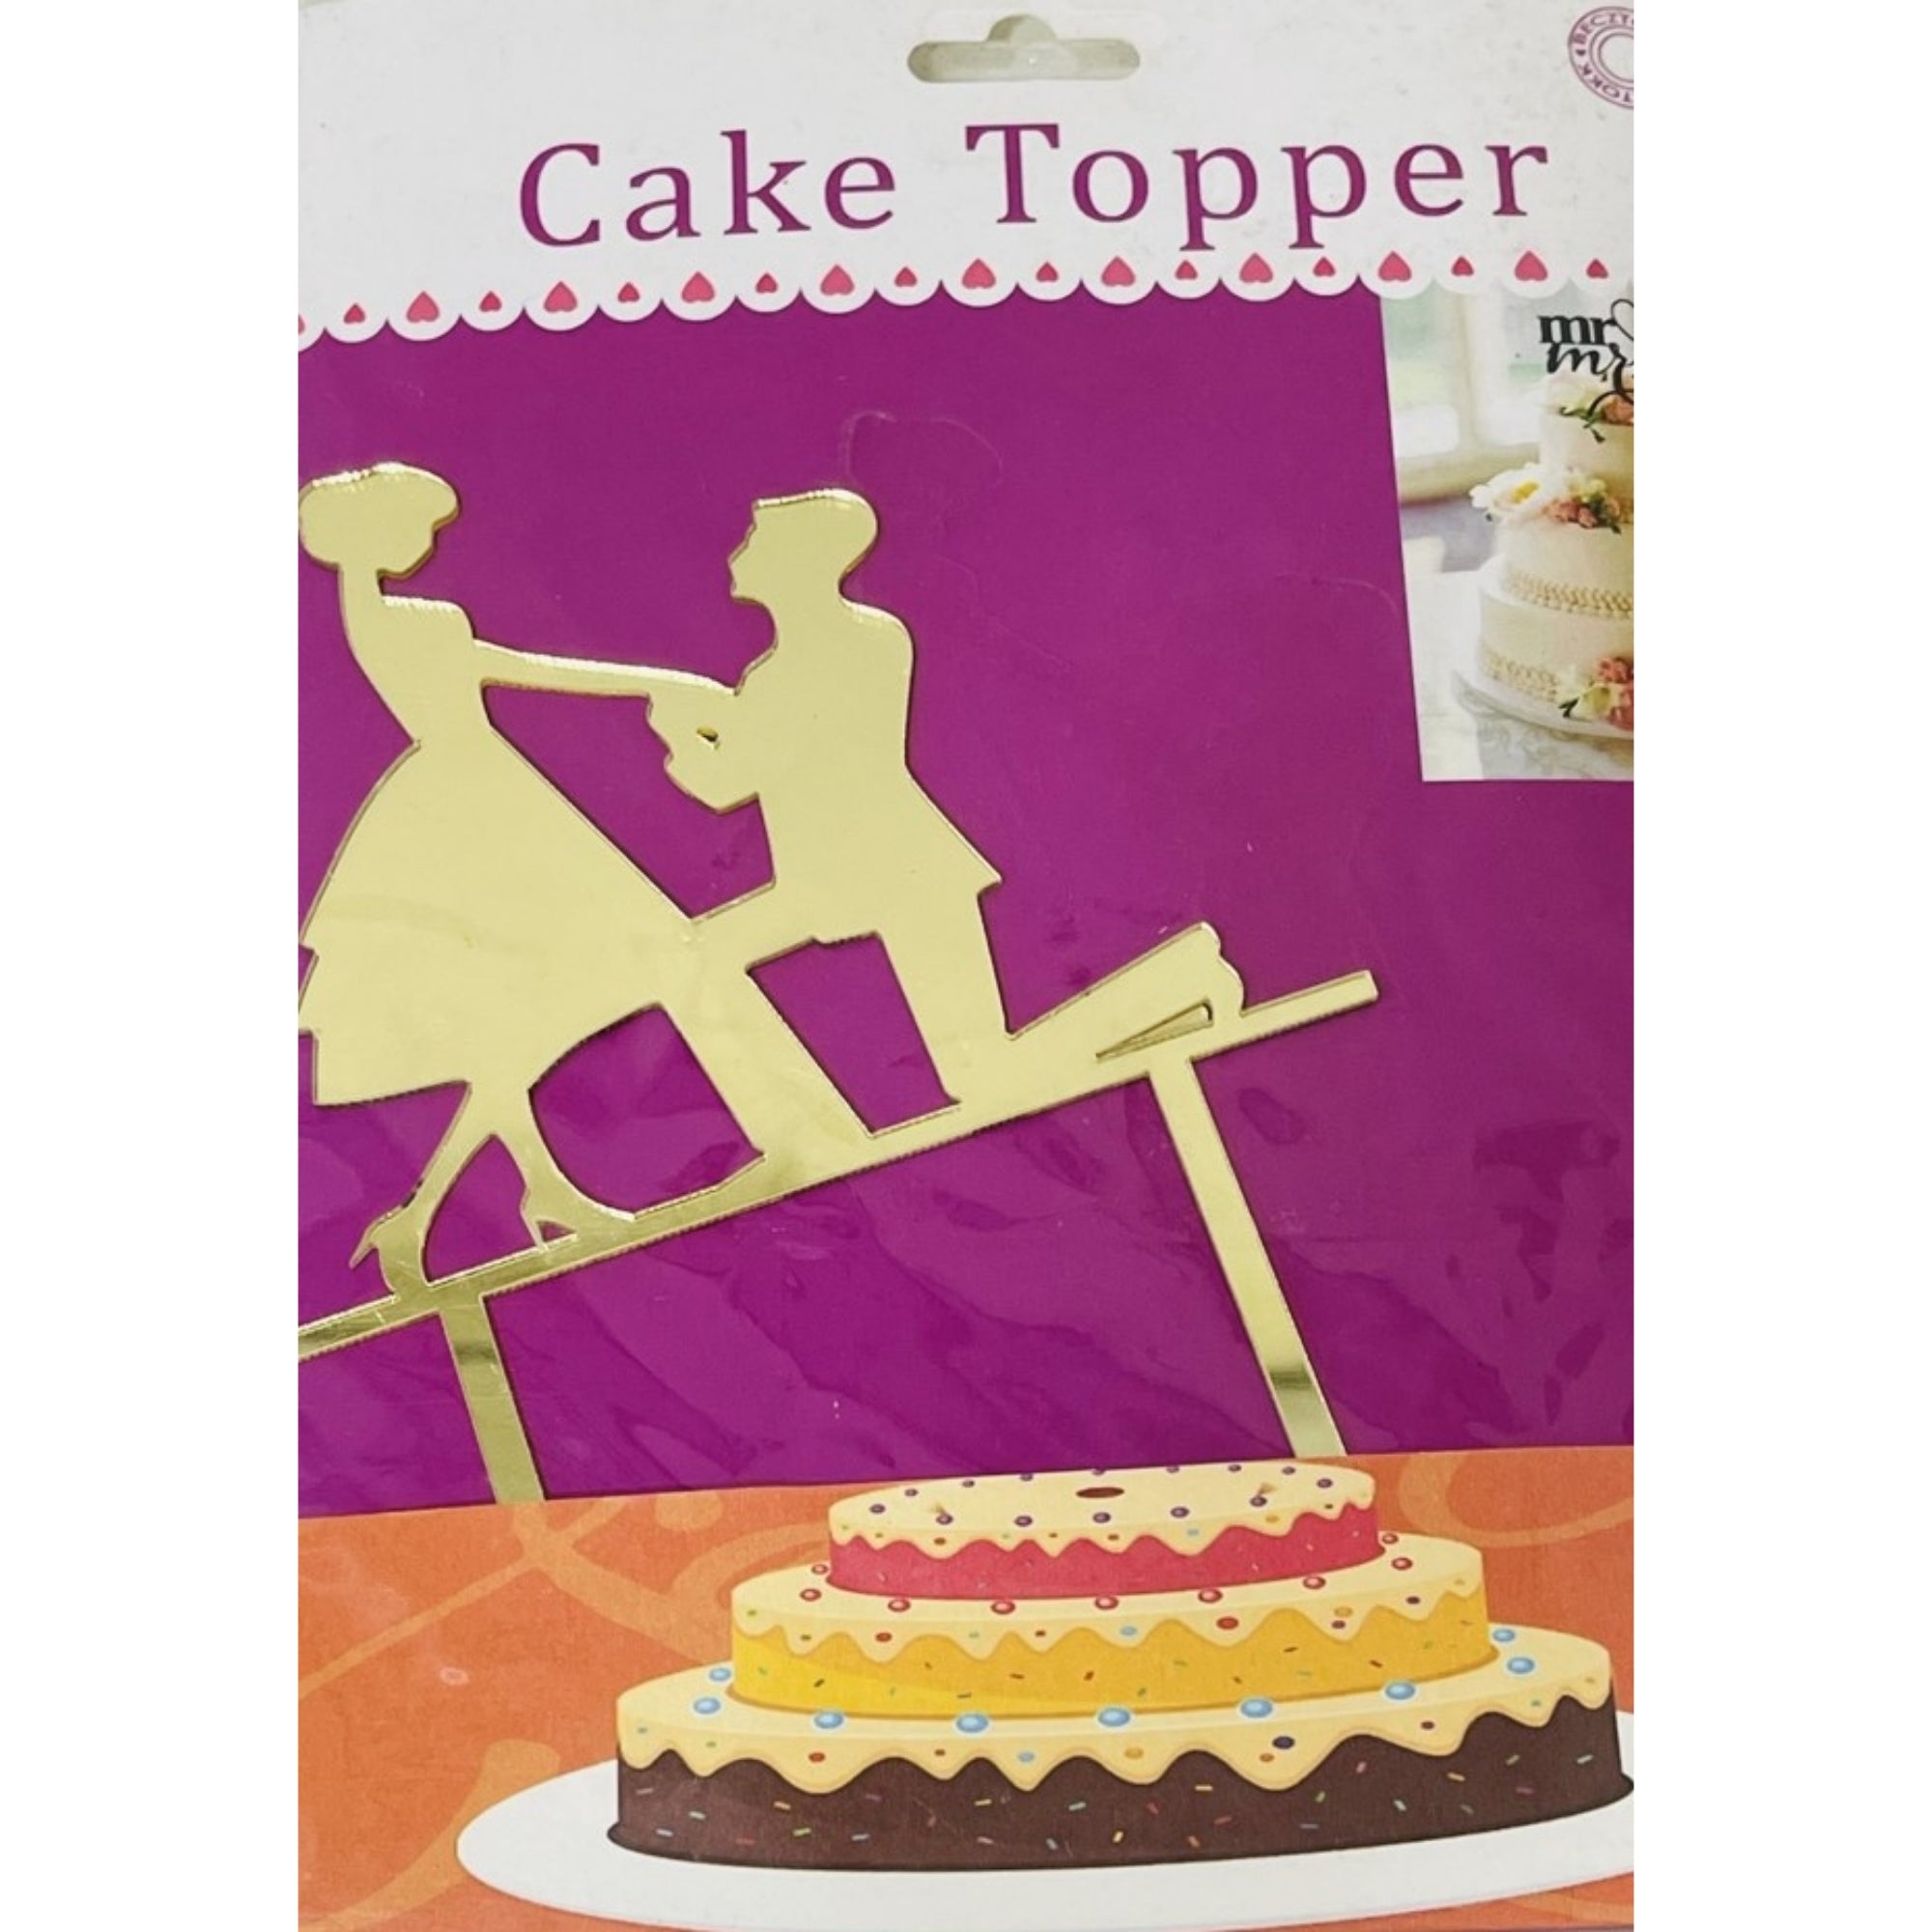 Acrylic Cake Topper or Silhouette - Design 3-7 Inch - Golden